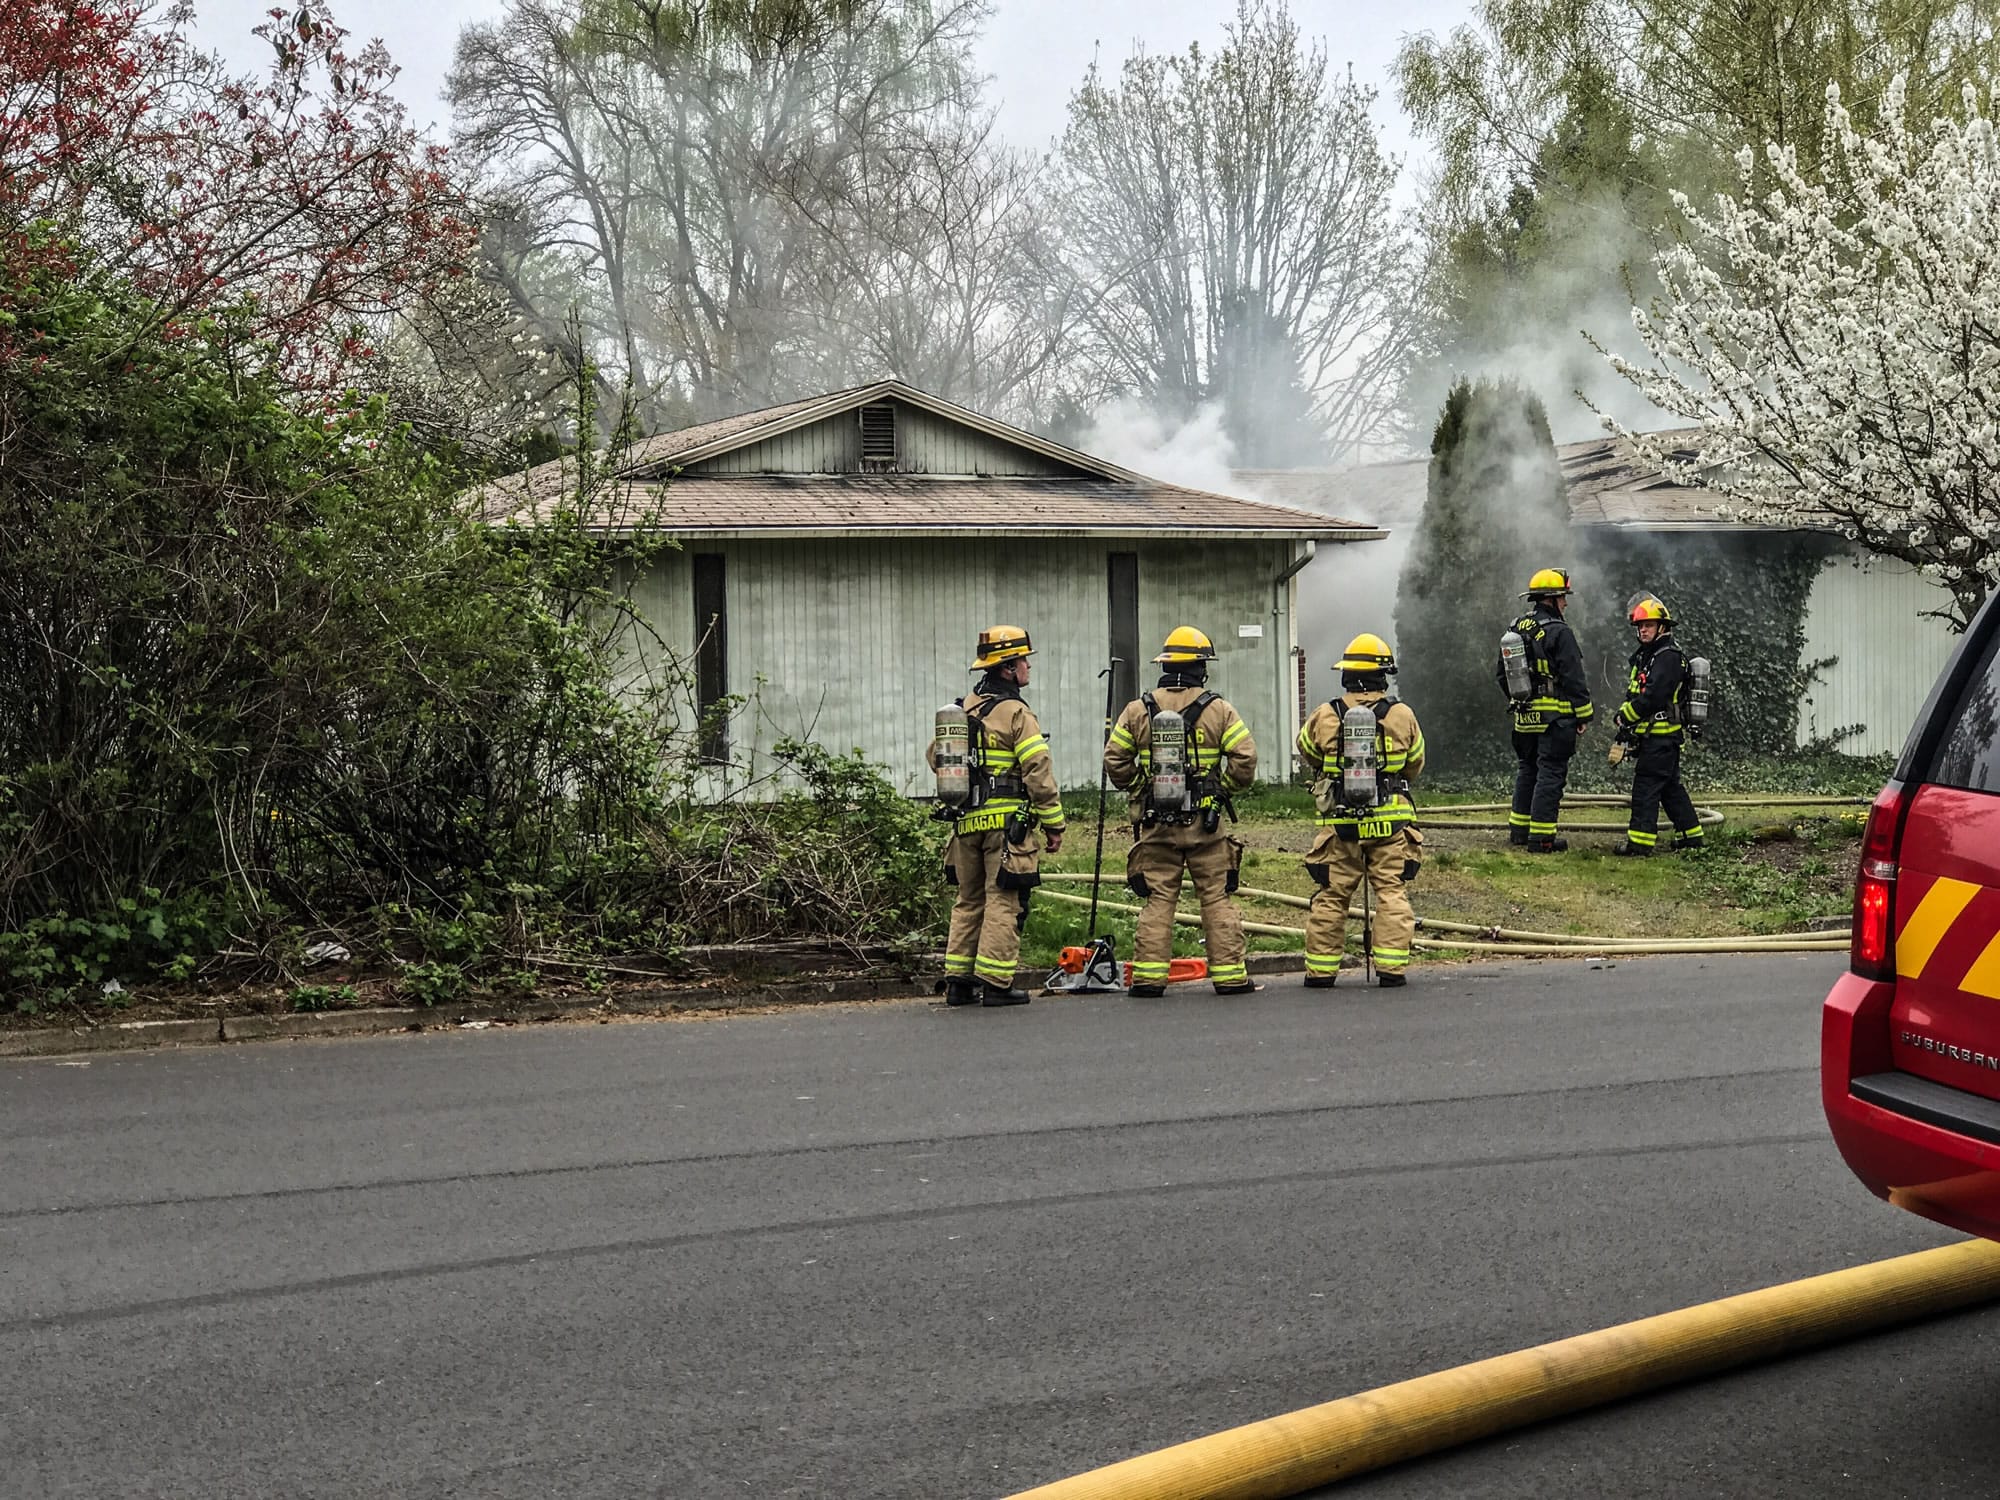 Crews put out a blaze at an apparently abandoned house in Vancouver's Truman neighborhood this afternoon.